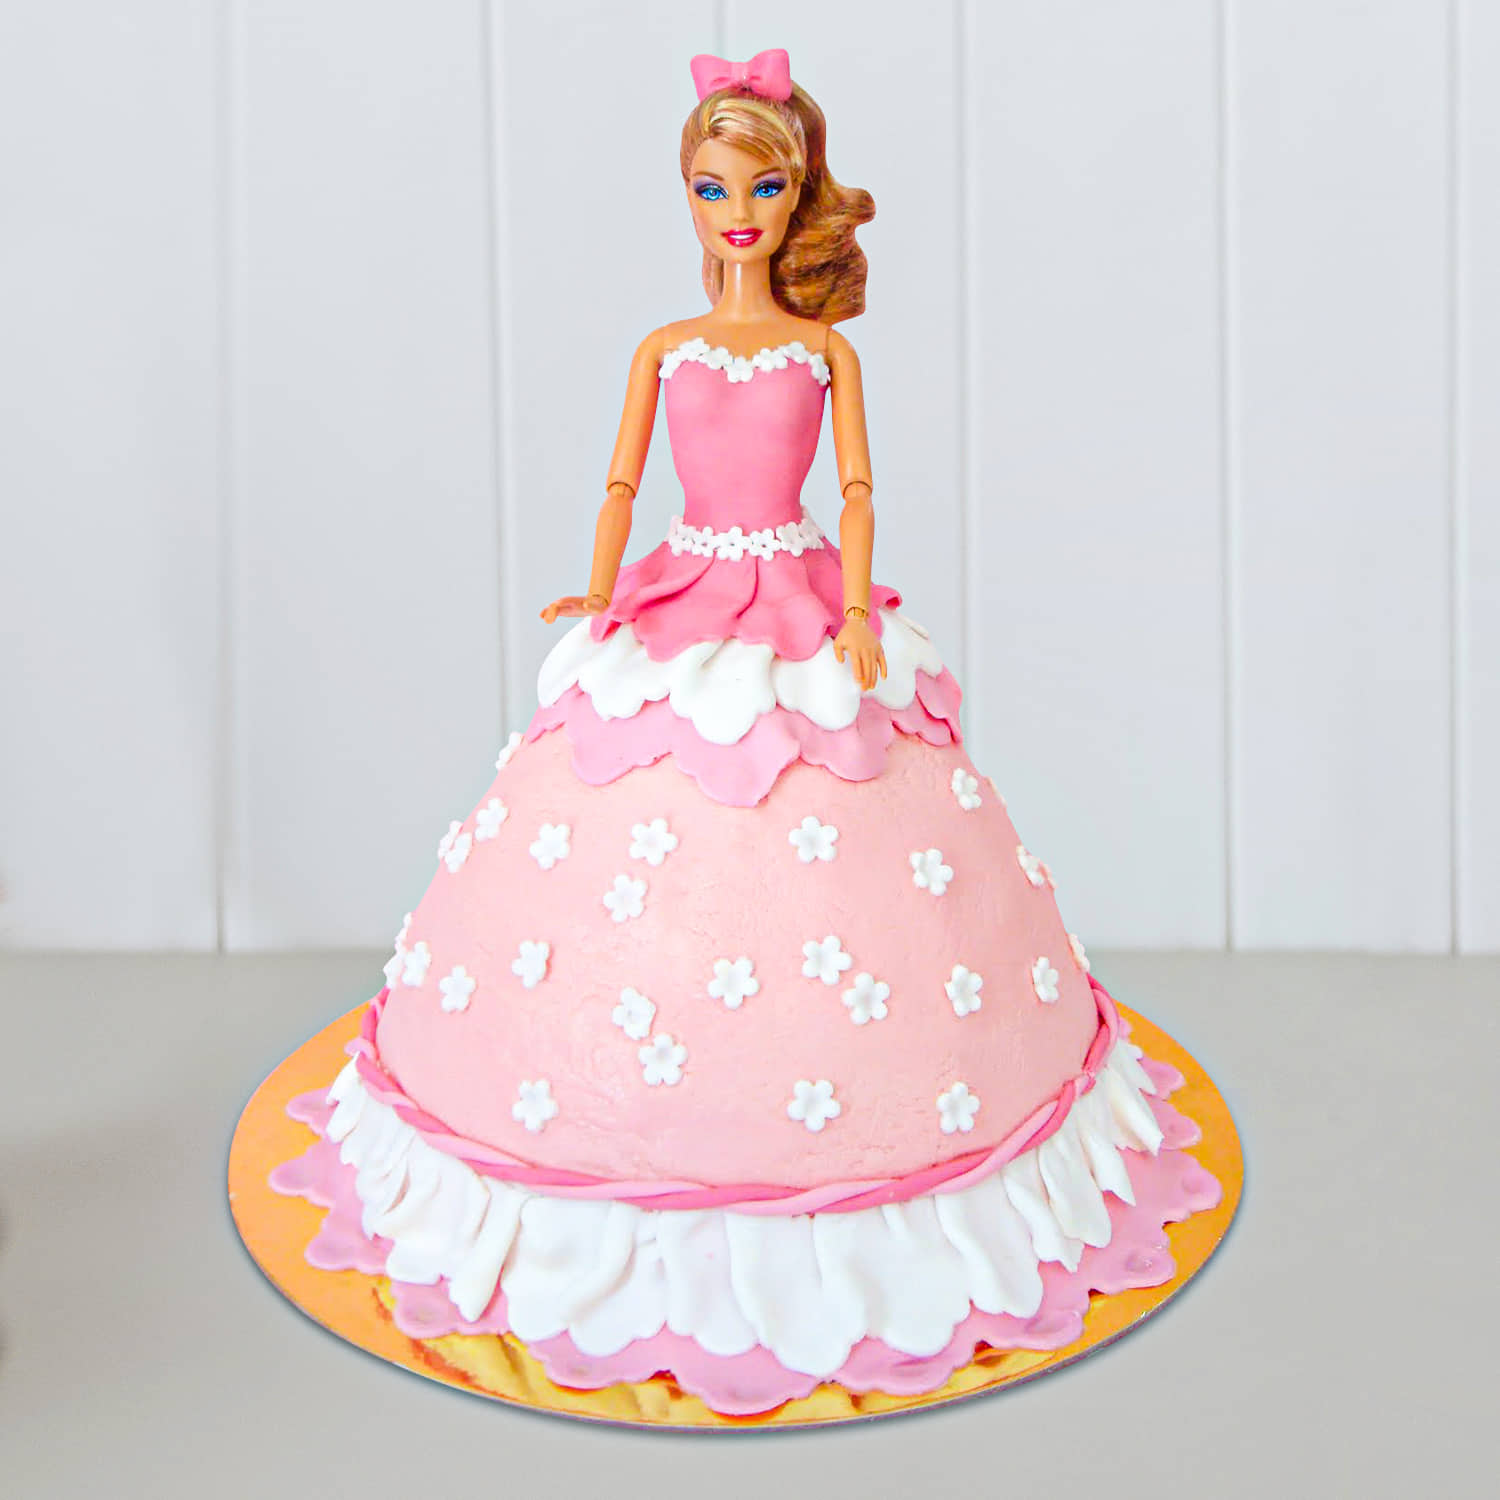 Barbie All Dolled Up Personalized Edible Cake Image Topper - Walmart.com